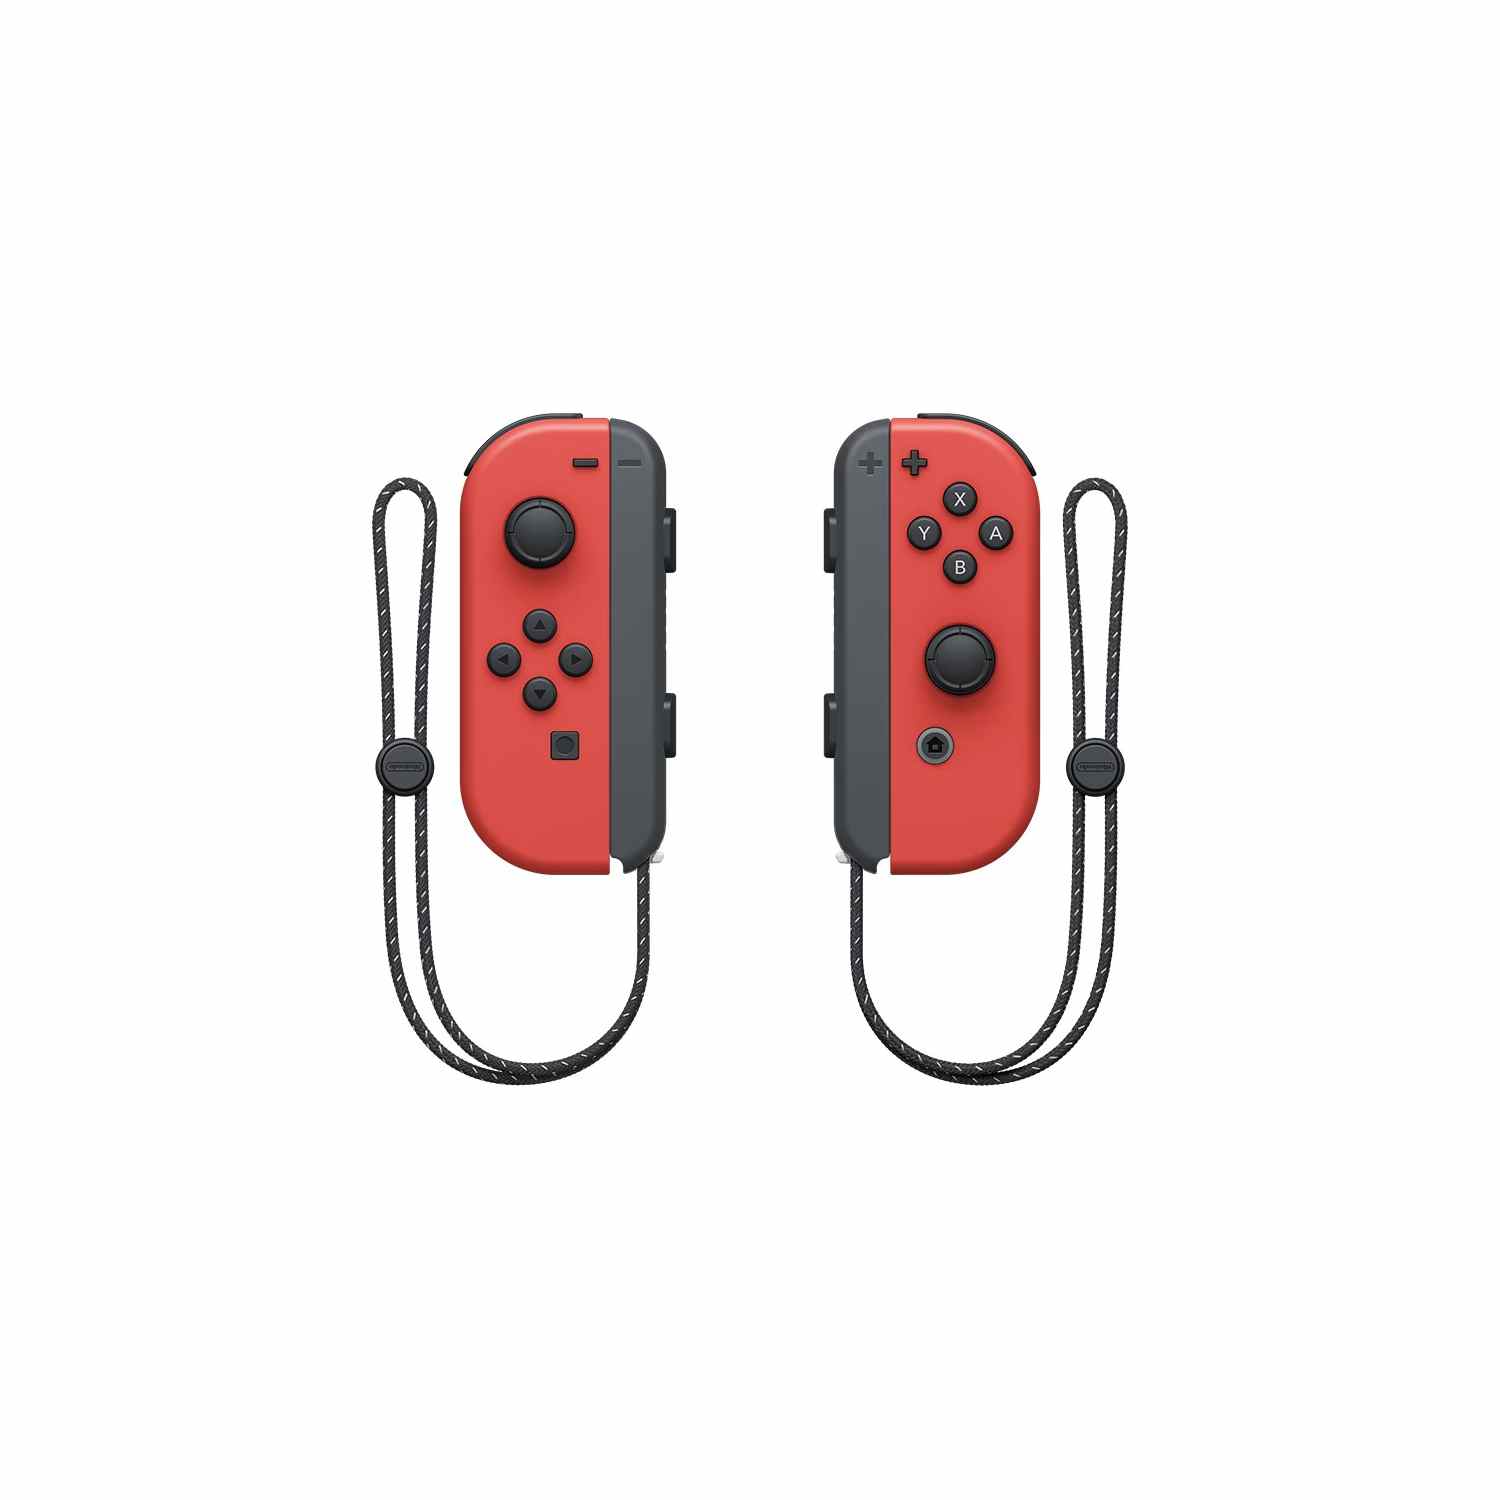 Nintendo Switch Console – Nintendo Switch™ - OLED Model - Mario Red Edition, , large image number 3